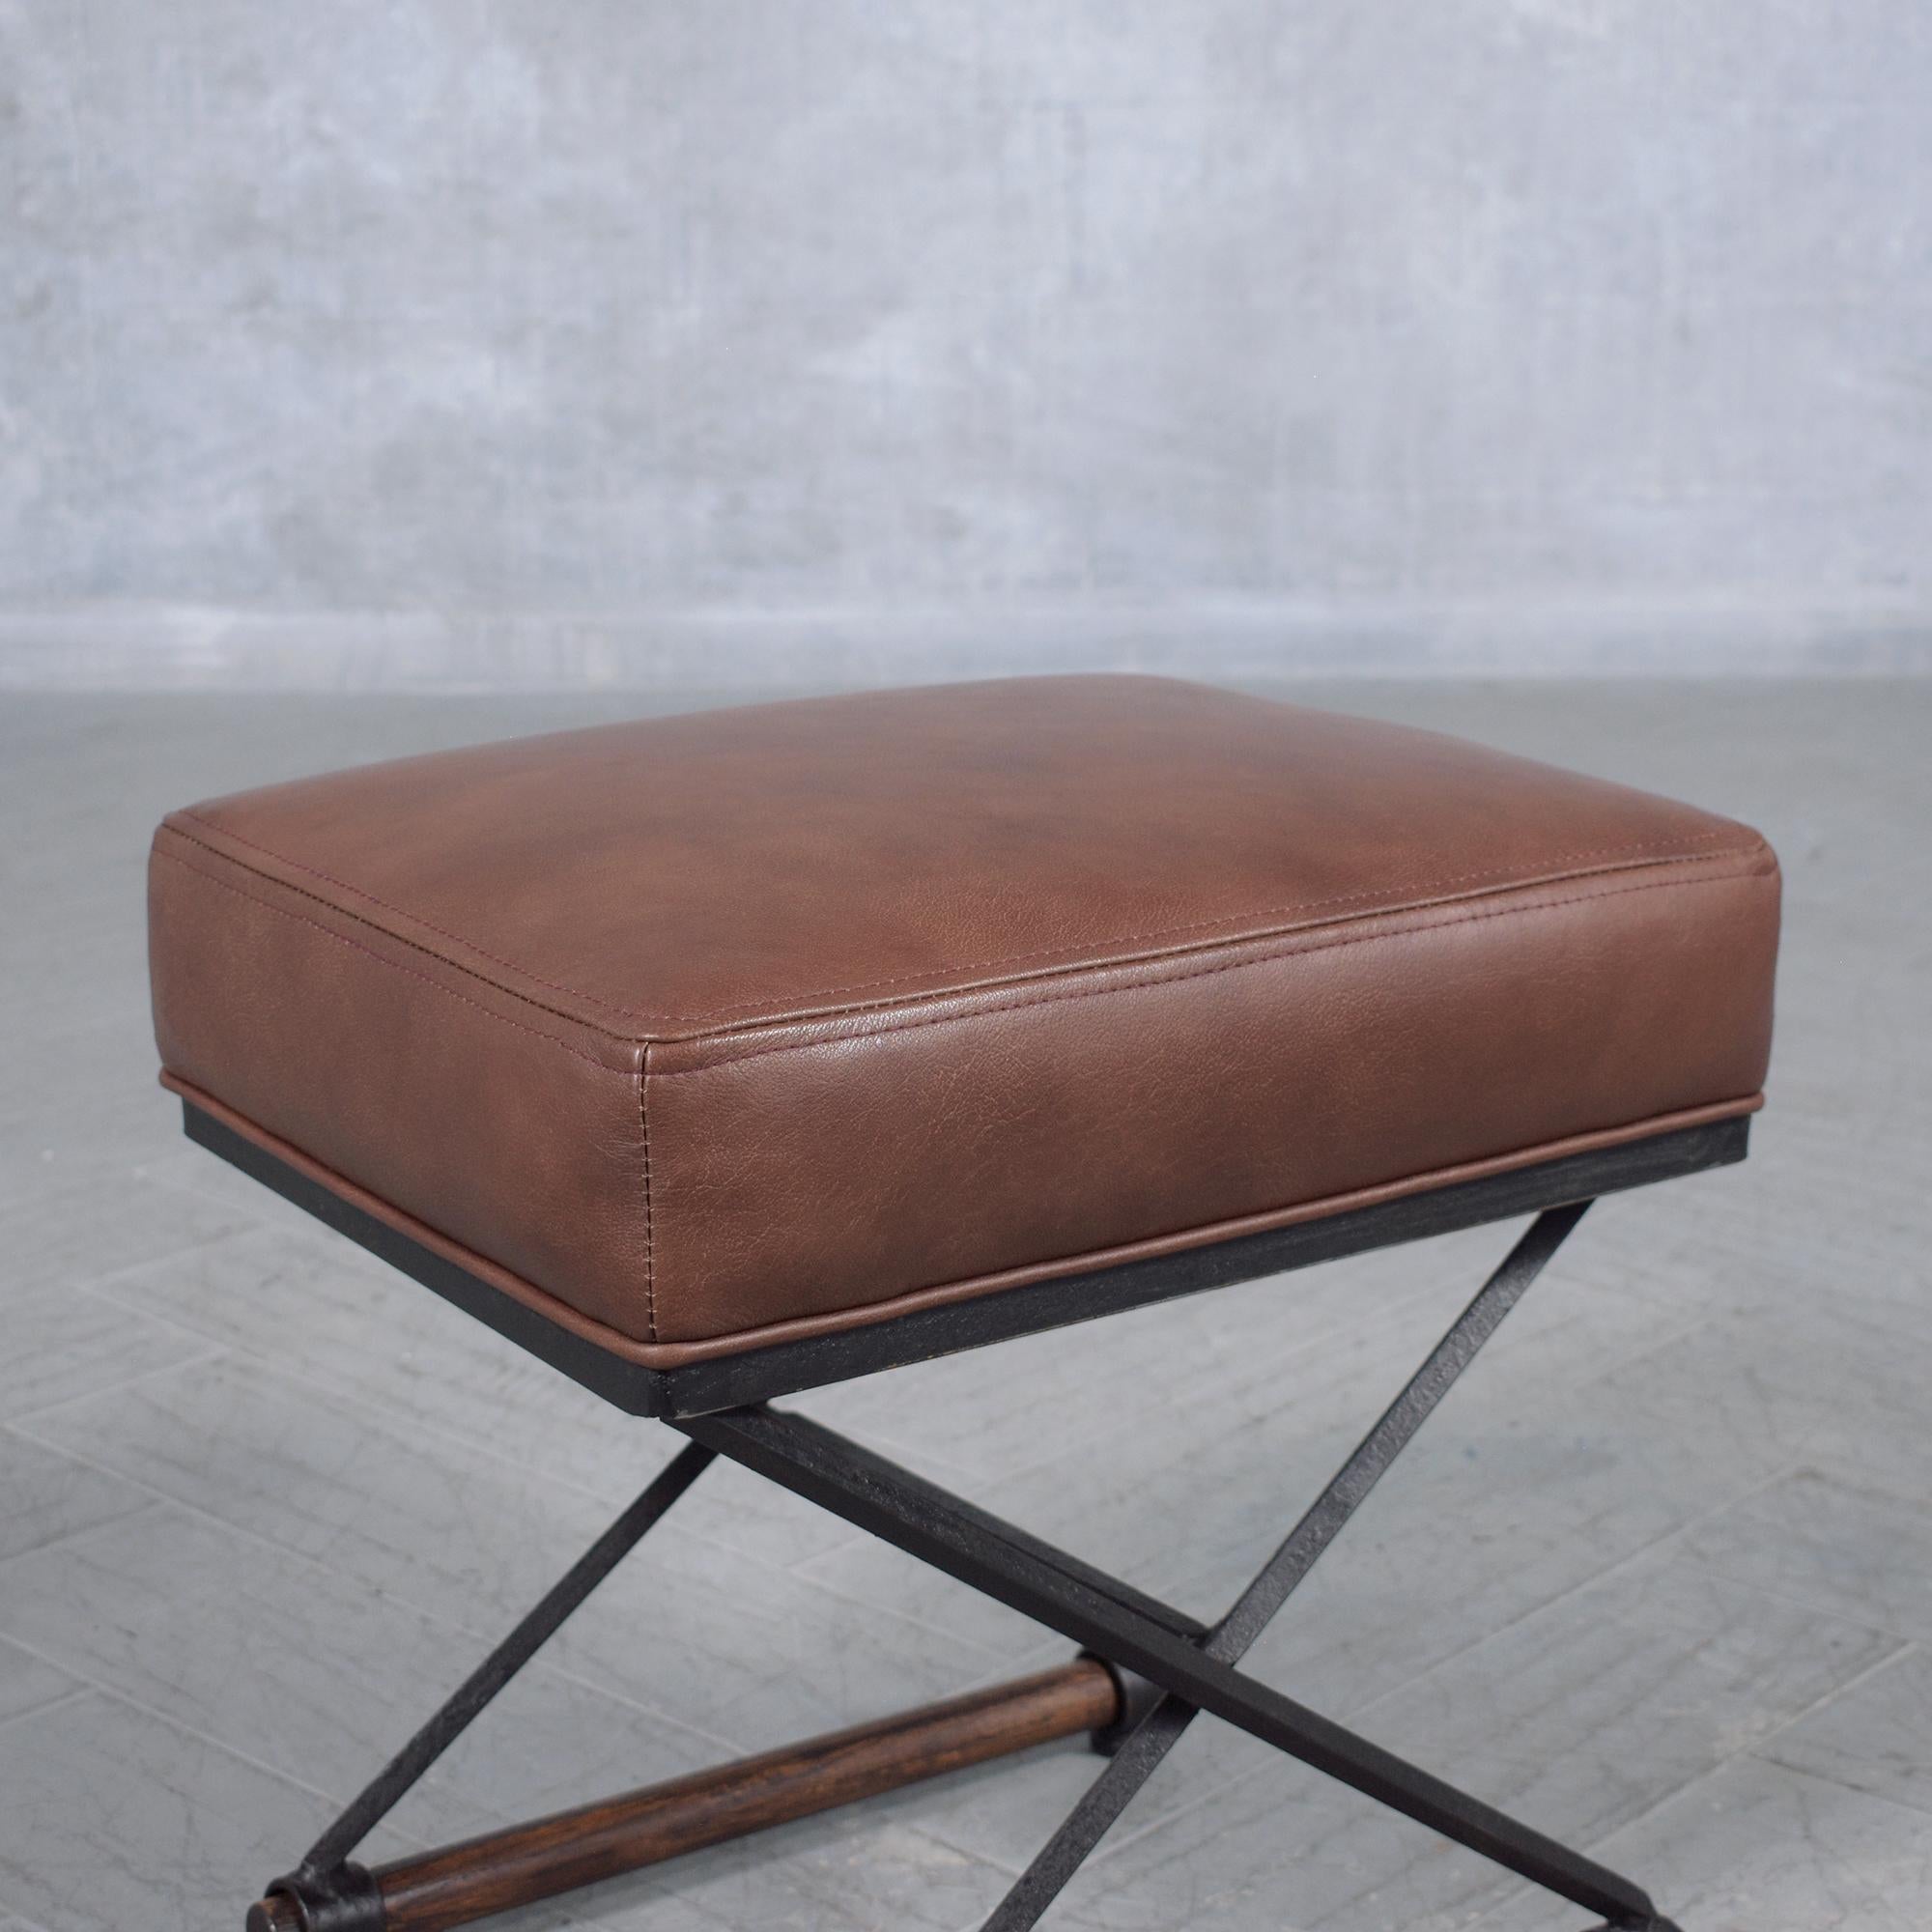 American Restored 1970s Campaign Benches: Iron & Oak with Dark Brown Leather Upholstery